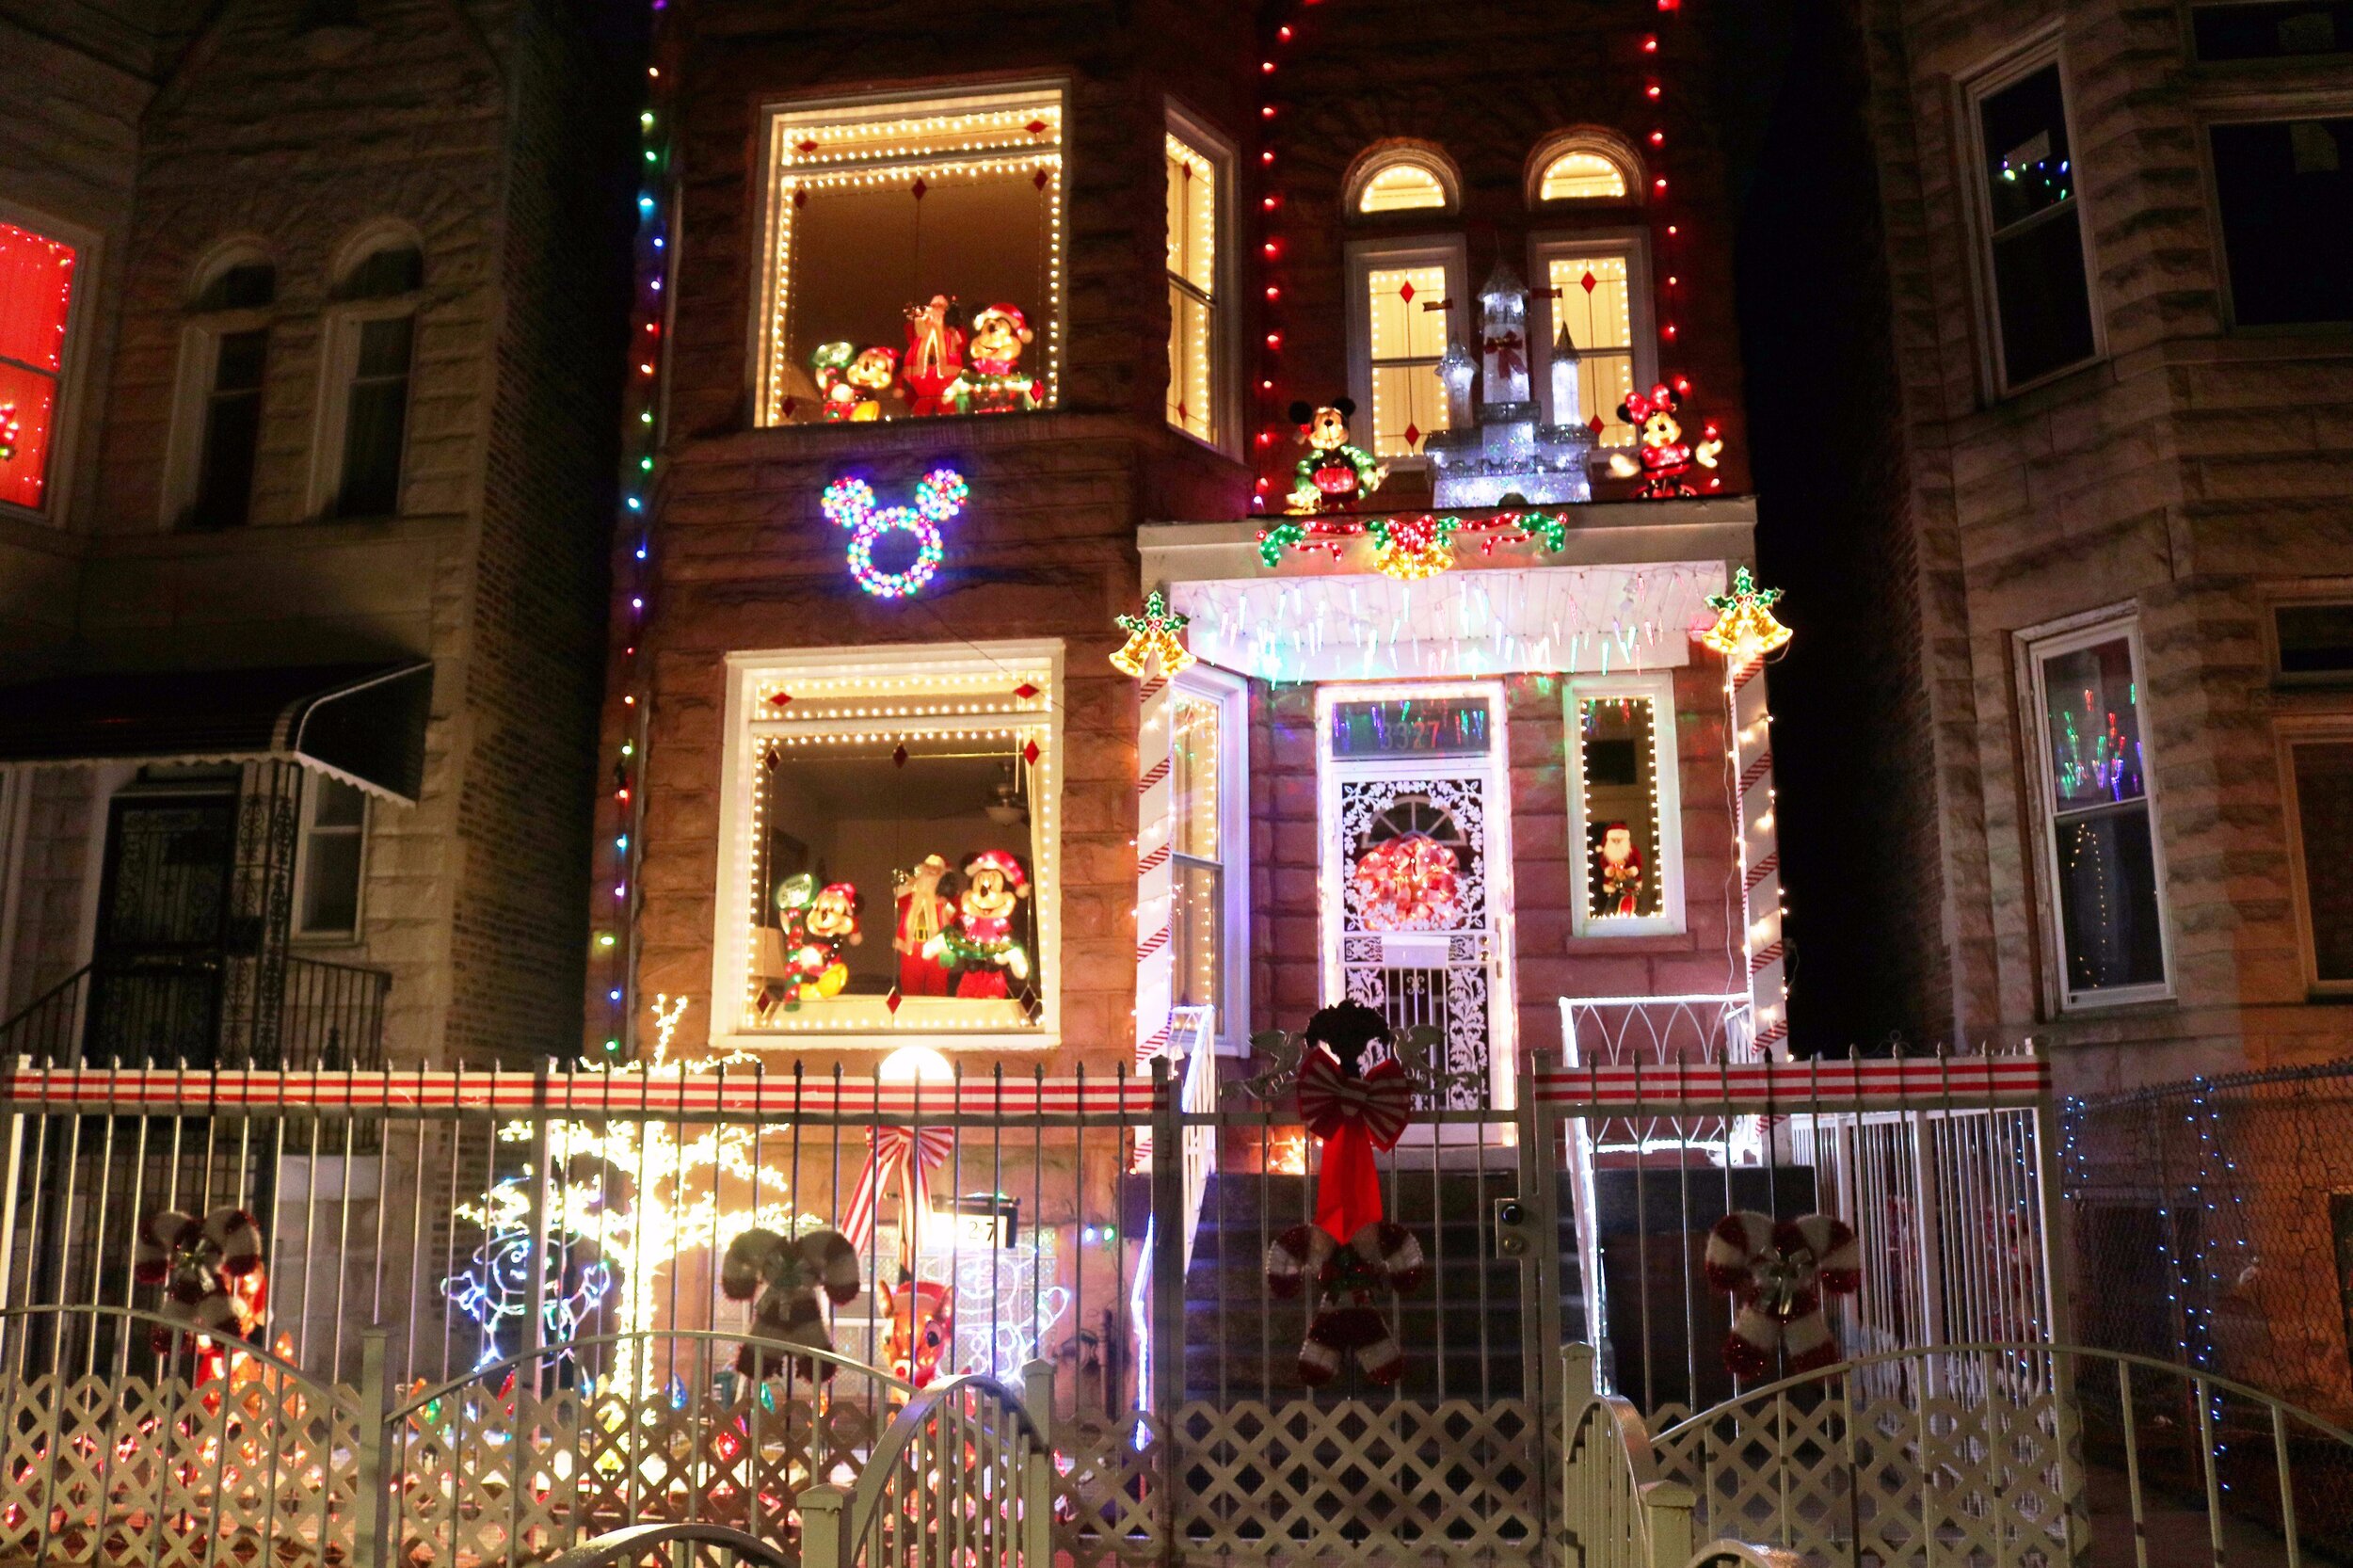  This is one of several houses participating in the annual Christmas lighting event this year. 